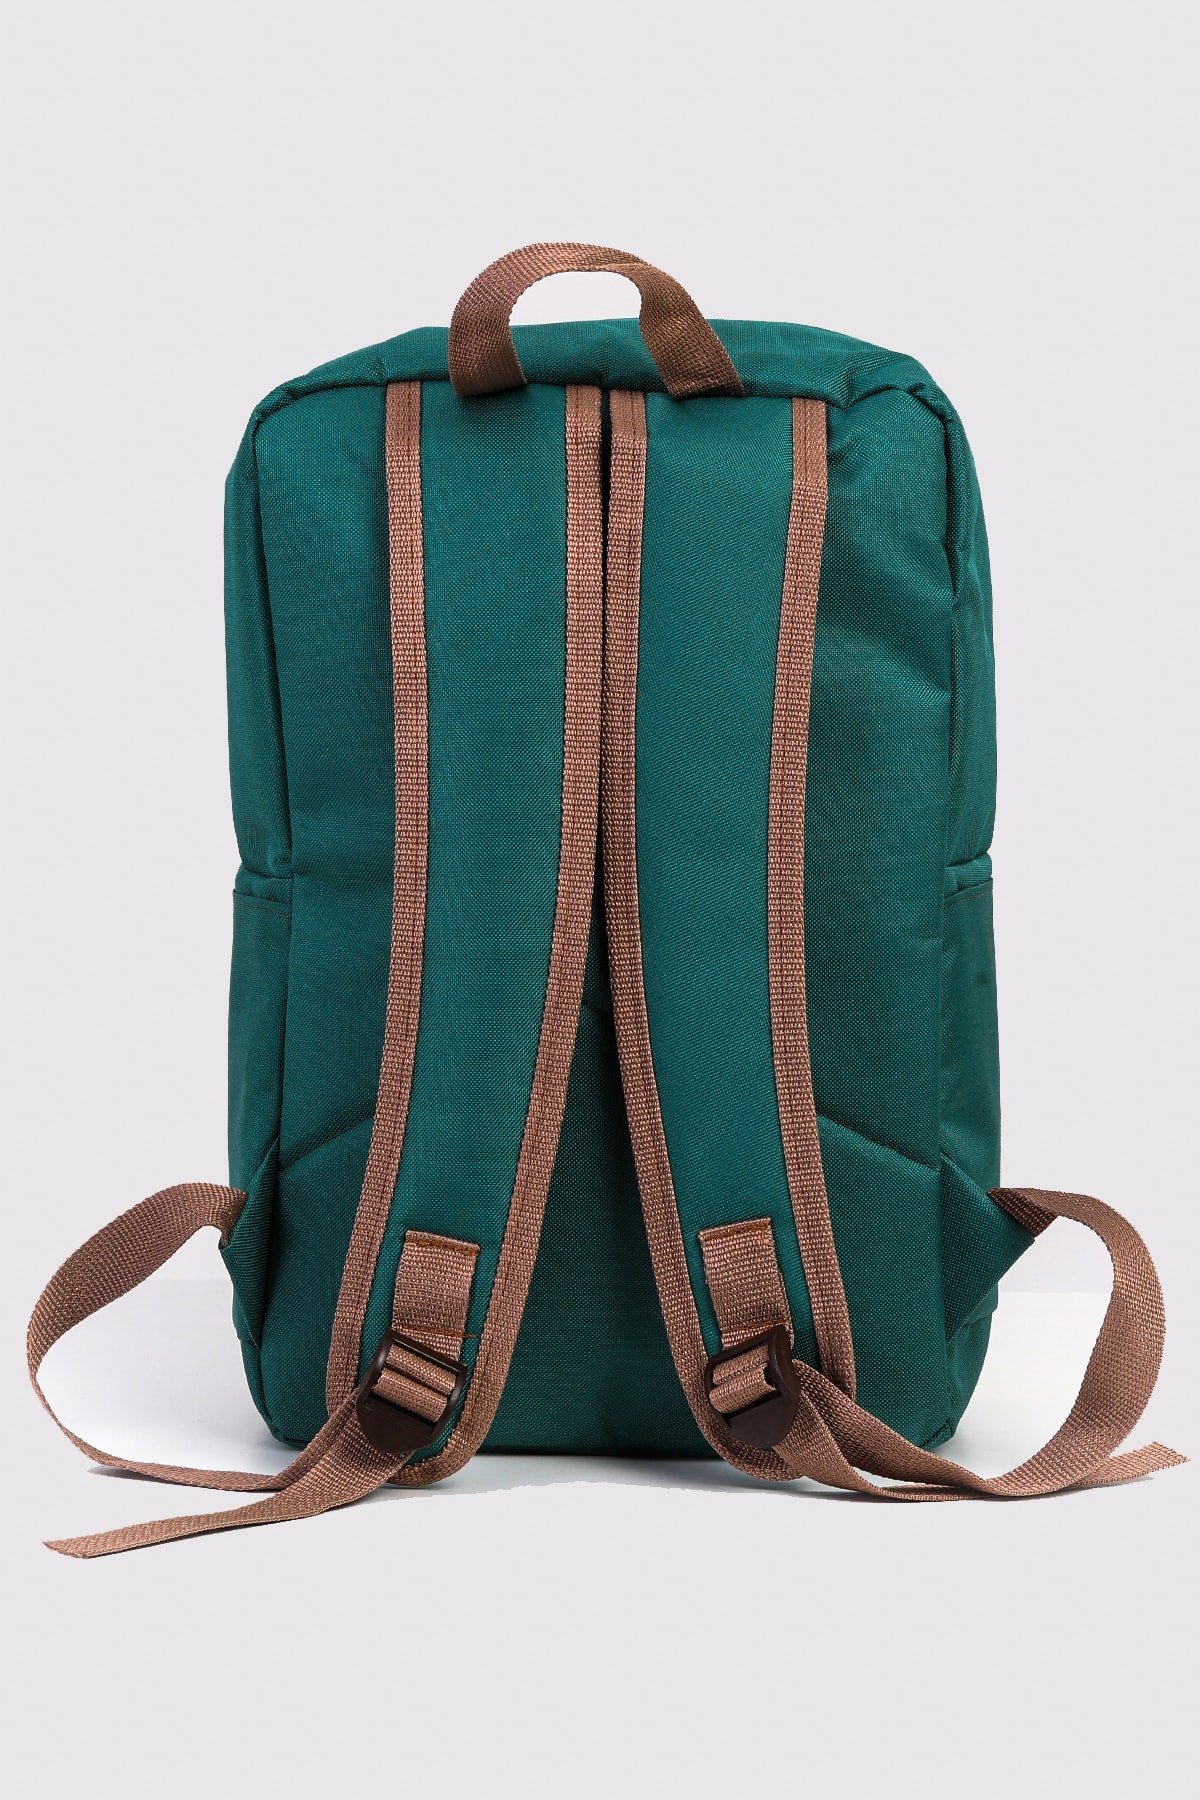 Unisex Green 100% Genuine Leather Detailed Waterproof 15.6 Inch Multi-Compartment Backpack with Laptop Compartment